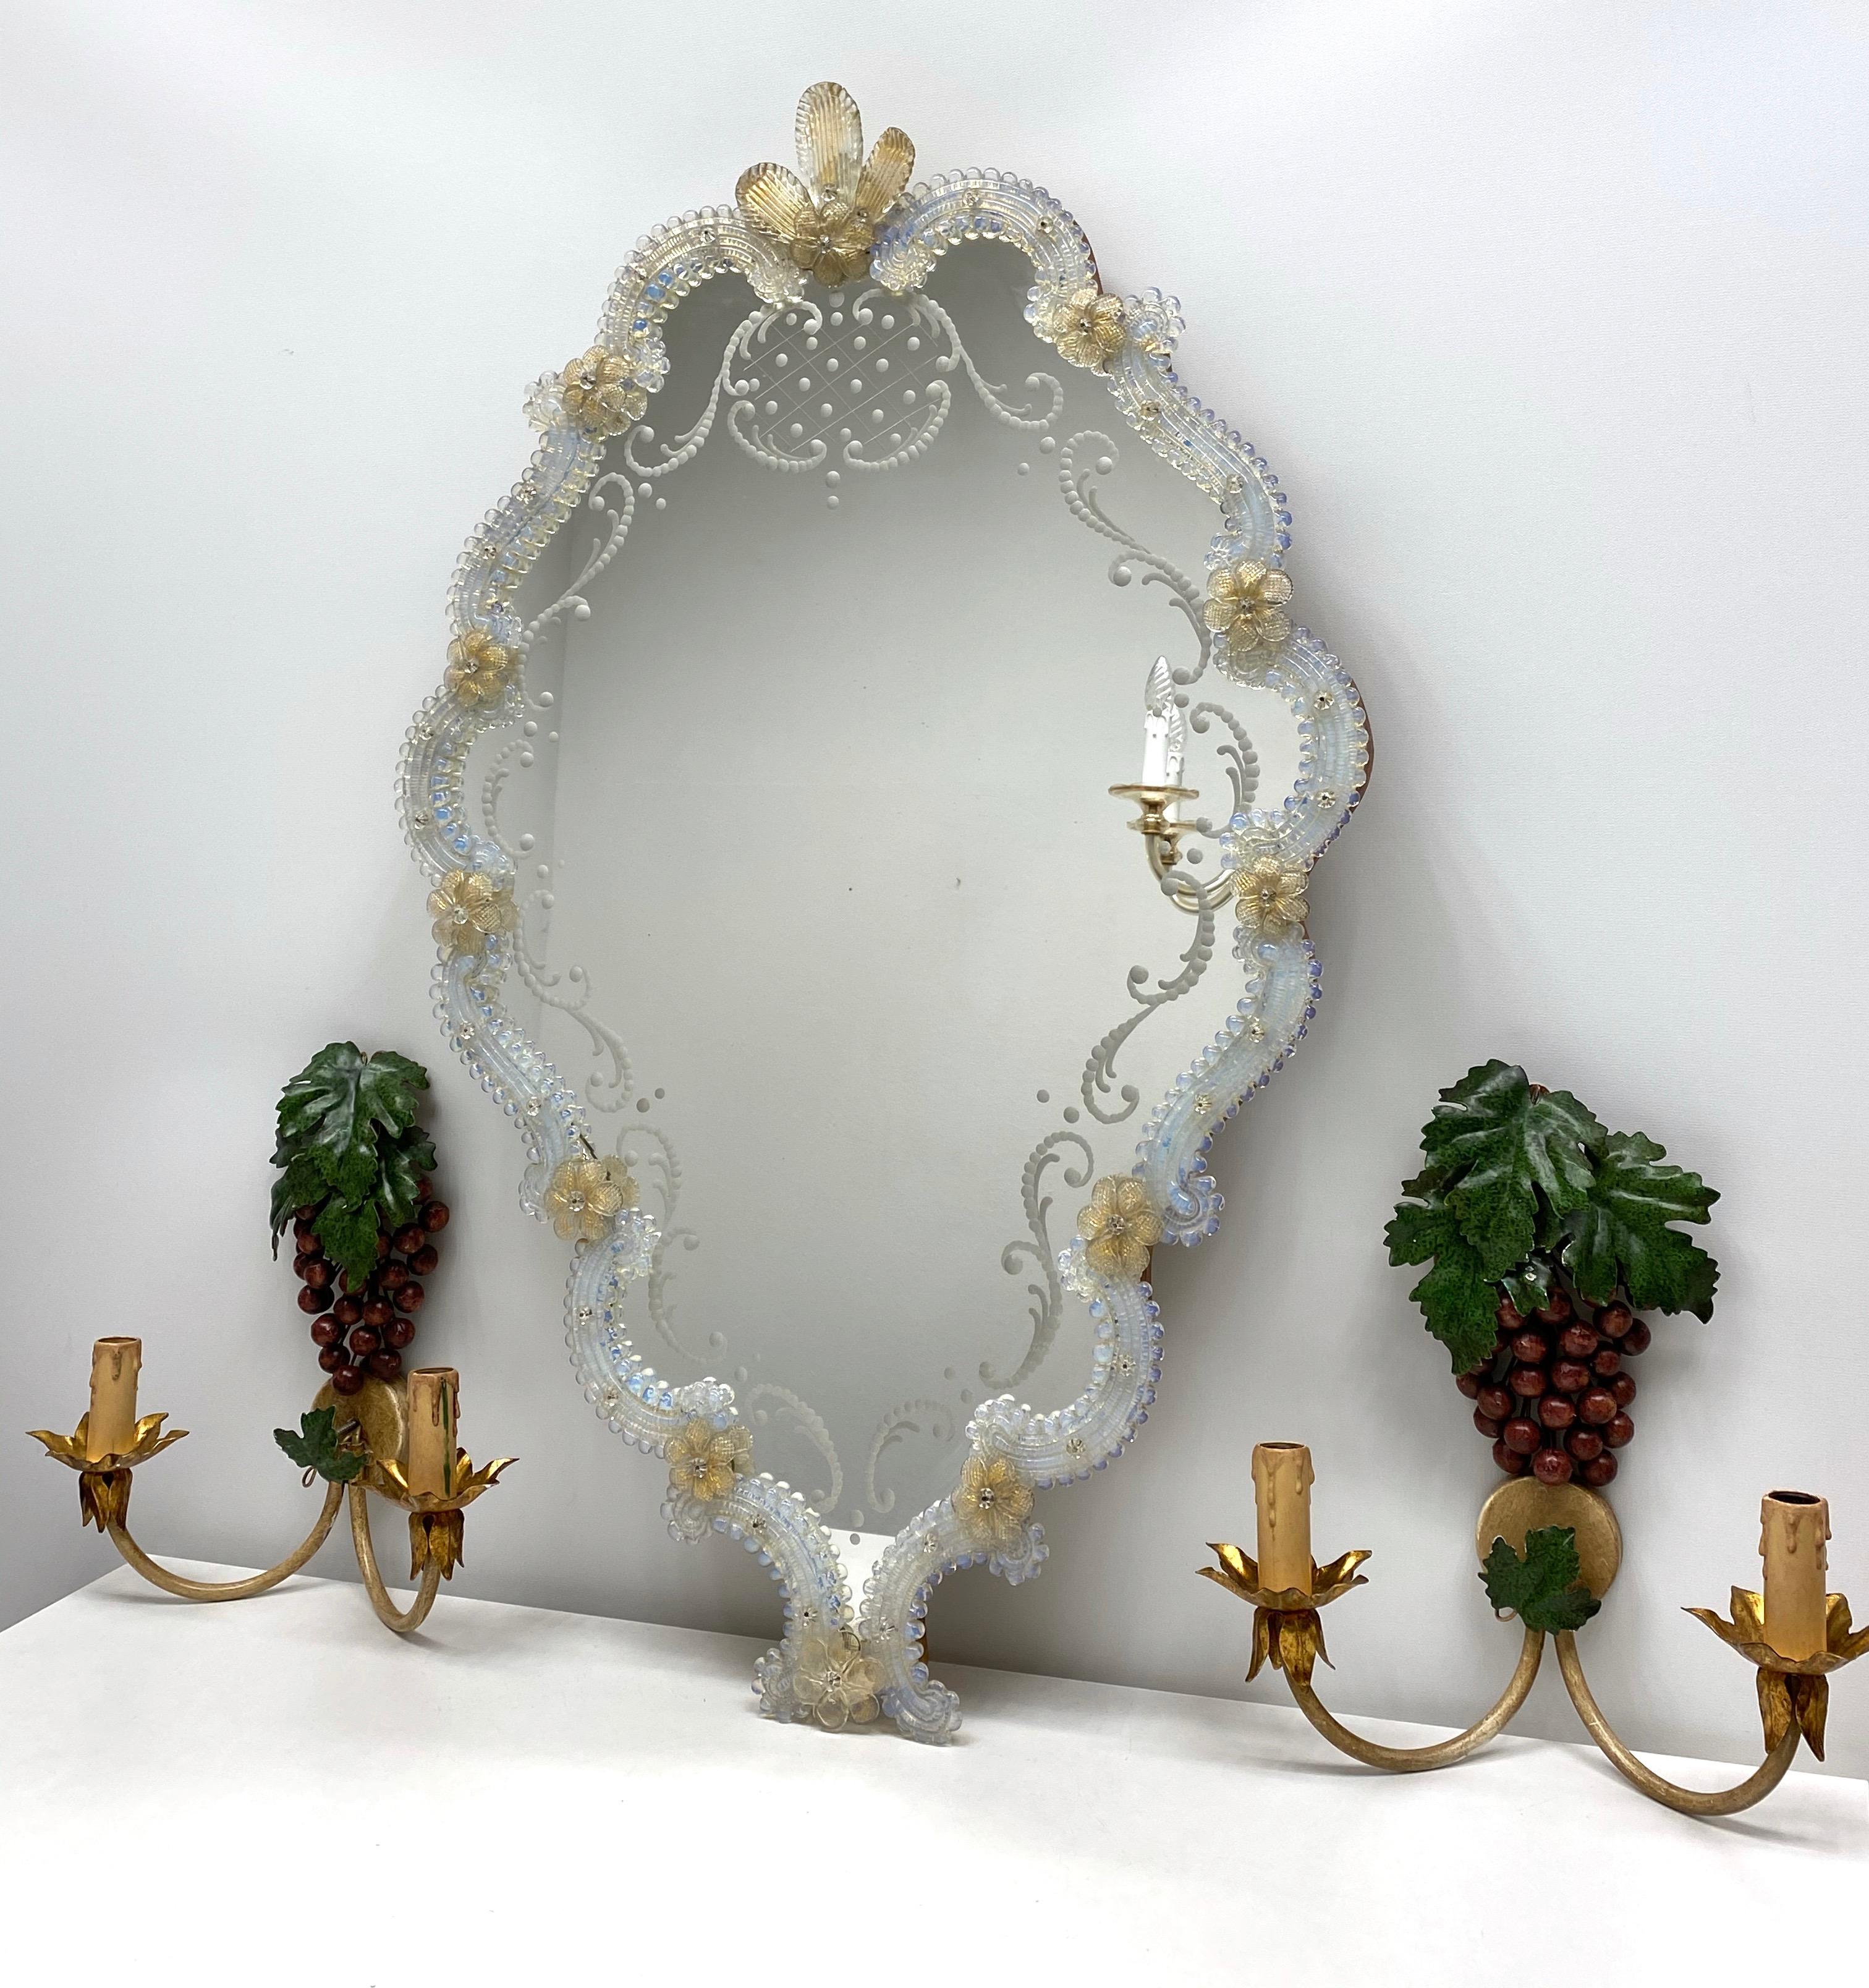 A stunning large Murano glass mirror surrounded with handmade glass flowers. Age circa 1950s. Some edged branches in the mirror. With signs of wear as expected with age and use. Obviously this item is not new, so please check all photos before